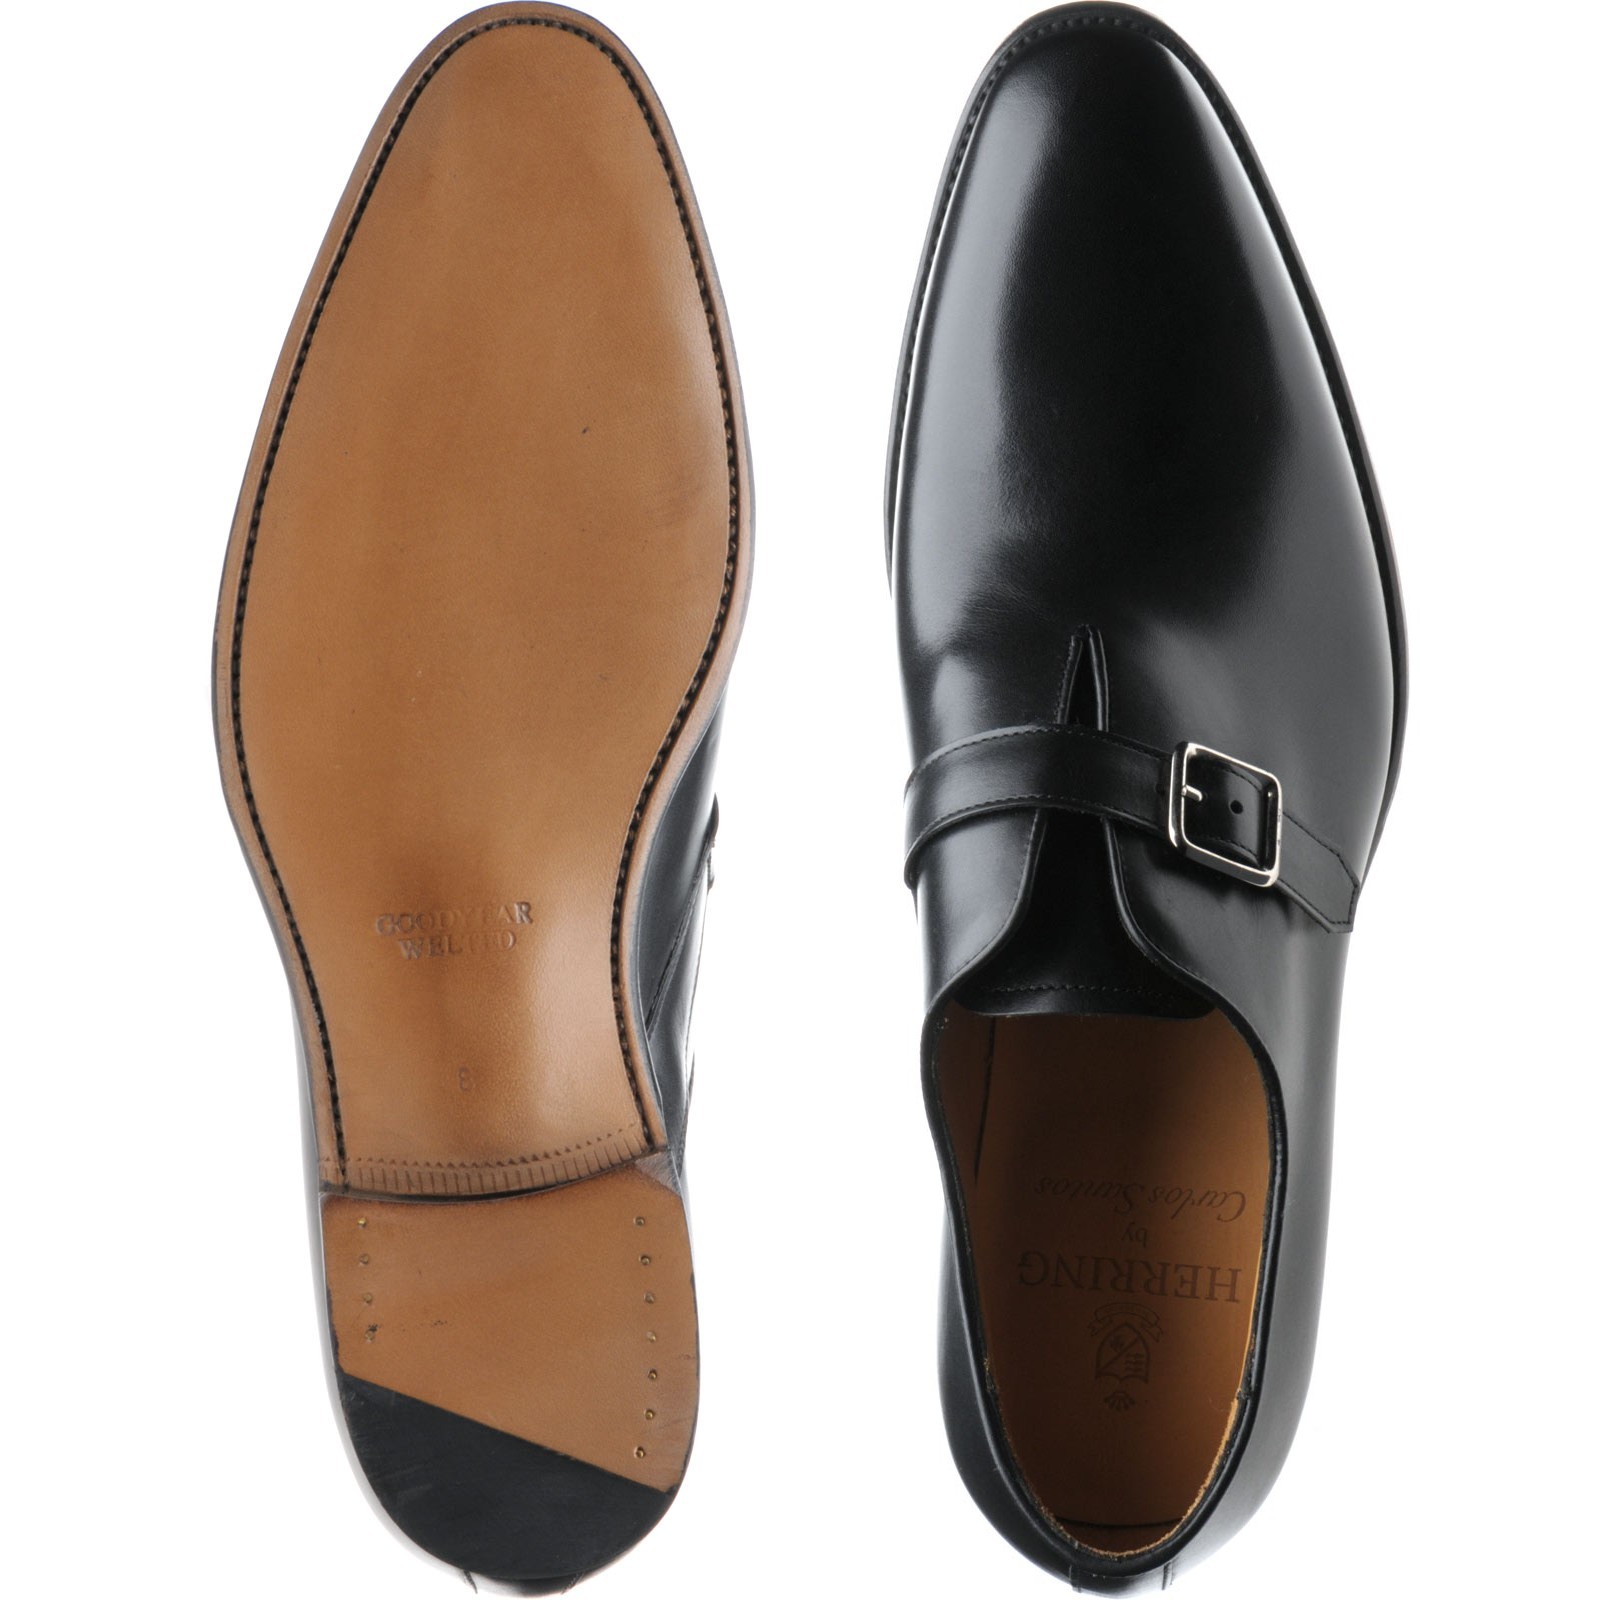 Herring shoes | Herring Classic | Lawrence monk shoes in Black Calf at ...